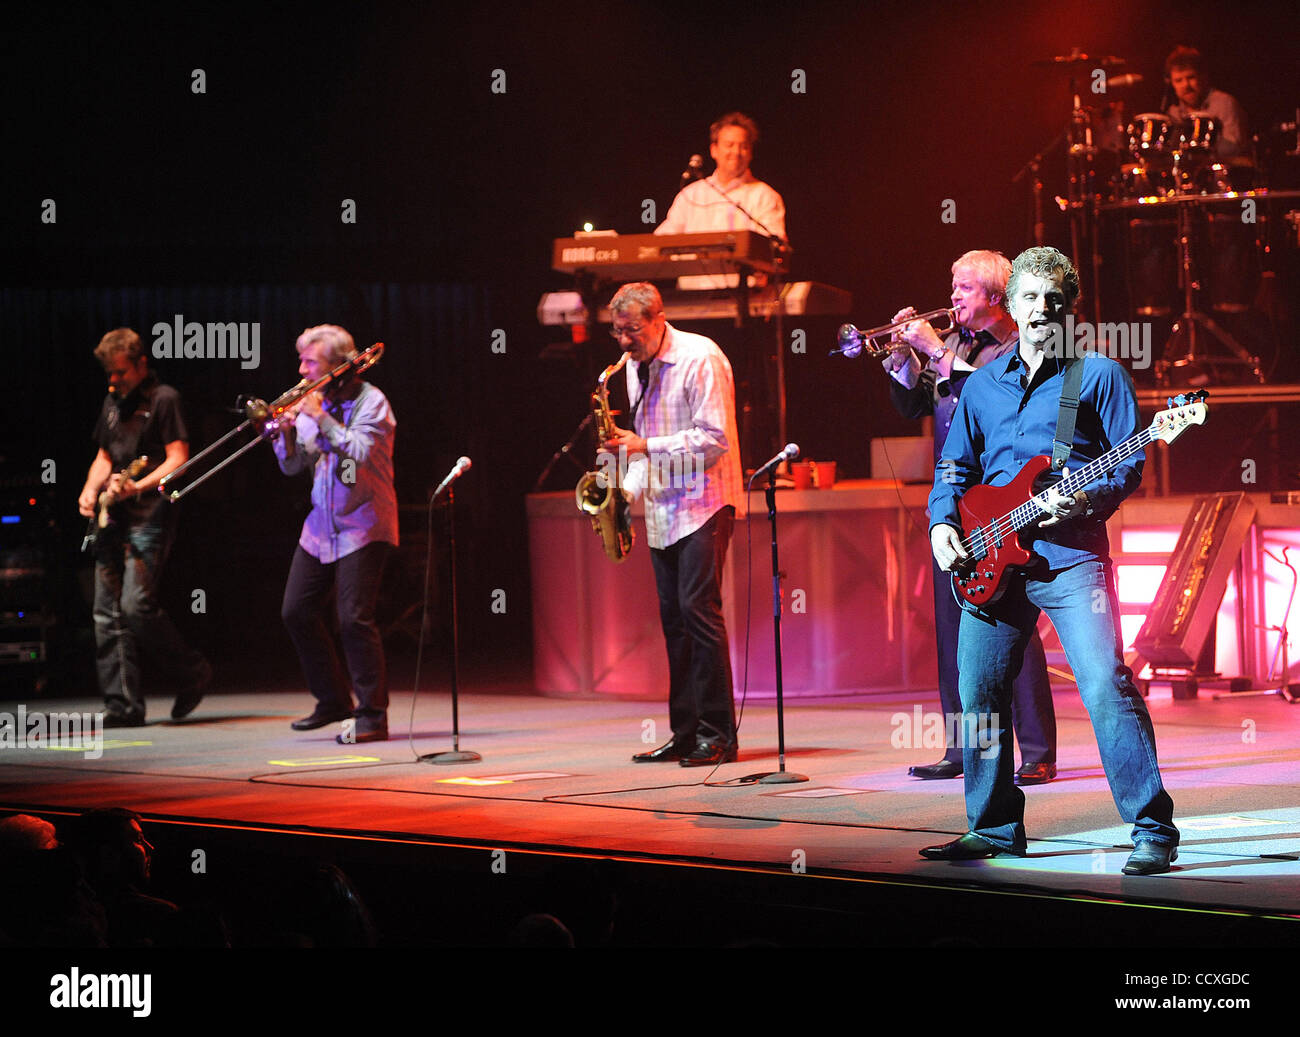 May 18, 2010 - Durham, North Carolina; USA - (R-L) Bass Guitarist JASON SCHEFF, Trumpeter LEE LOUGHNANE, Saxophonist WALTER PARAZAIDER, Guitarist KEITH HOWLAND, Drummer TRIS IMBODEN, and Keyboardist LOU PARDINI of the band Chicago performs live as their 2010 tour makes a stop at the Durham Performin Stock Photo